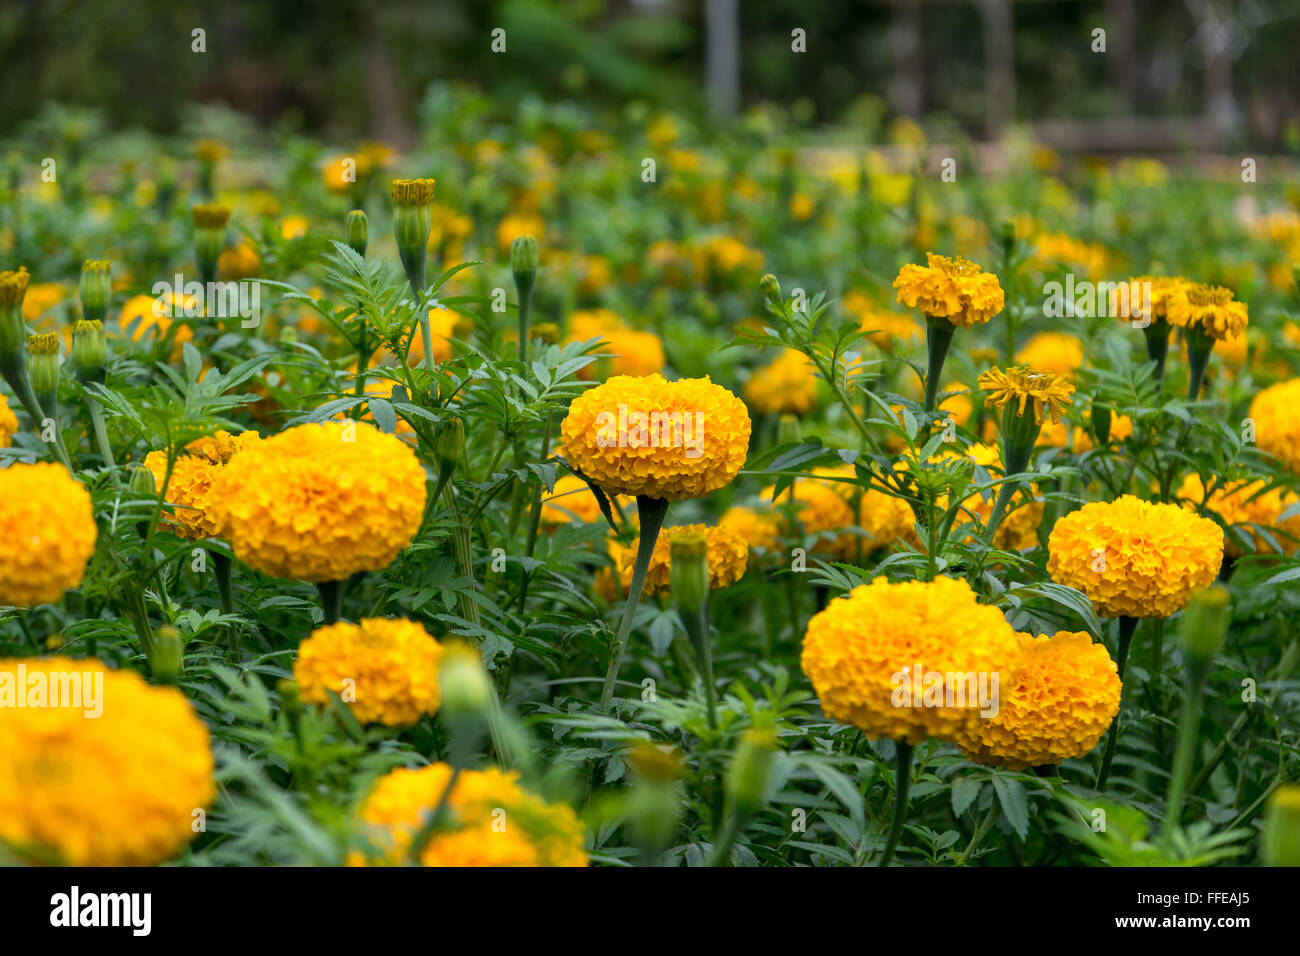 Beautiful and colorful golden yellow marigold flower. Stock Photo